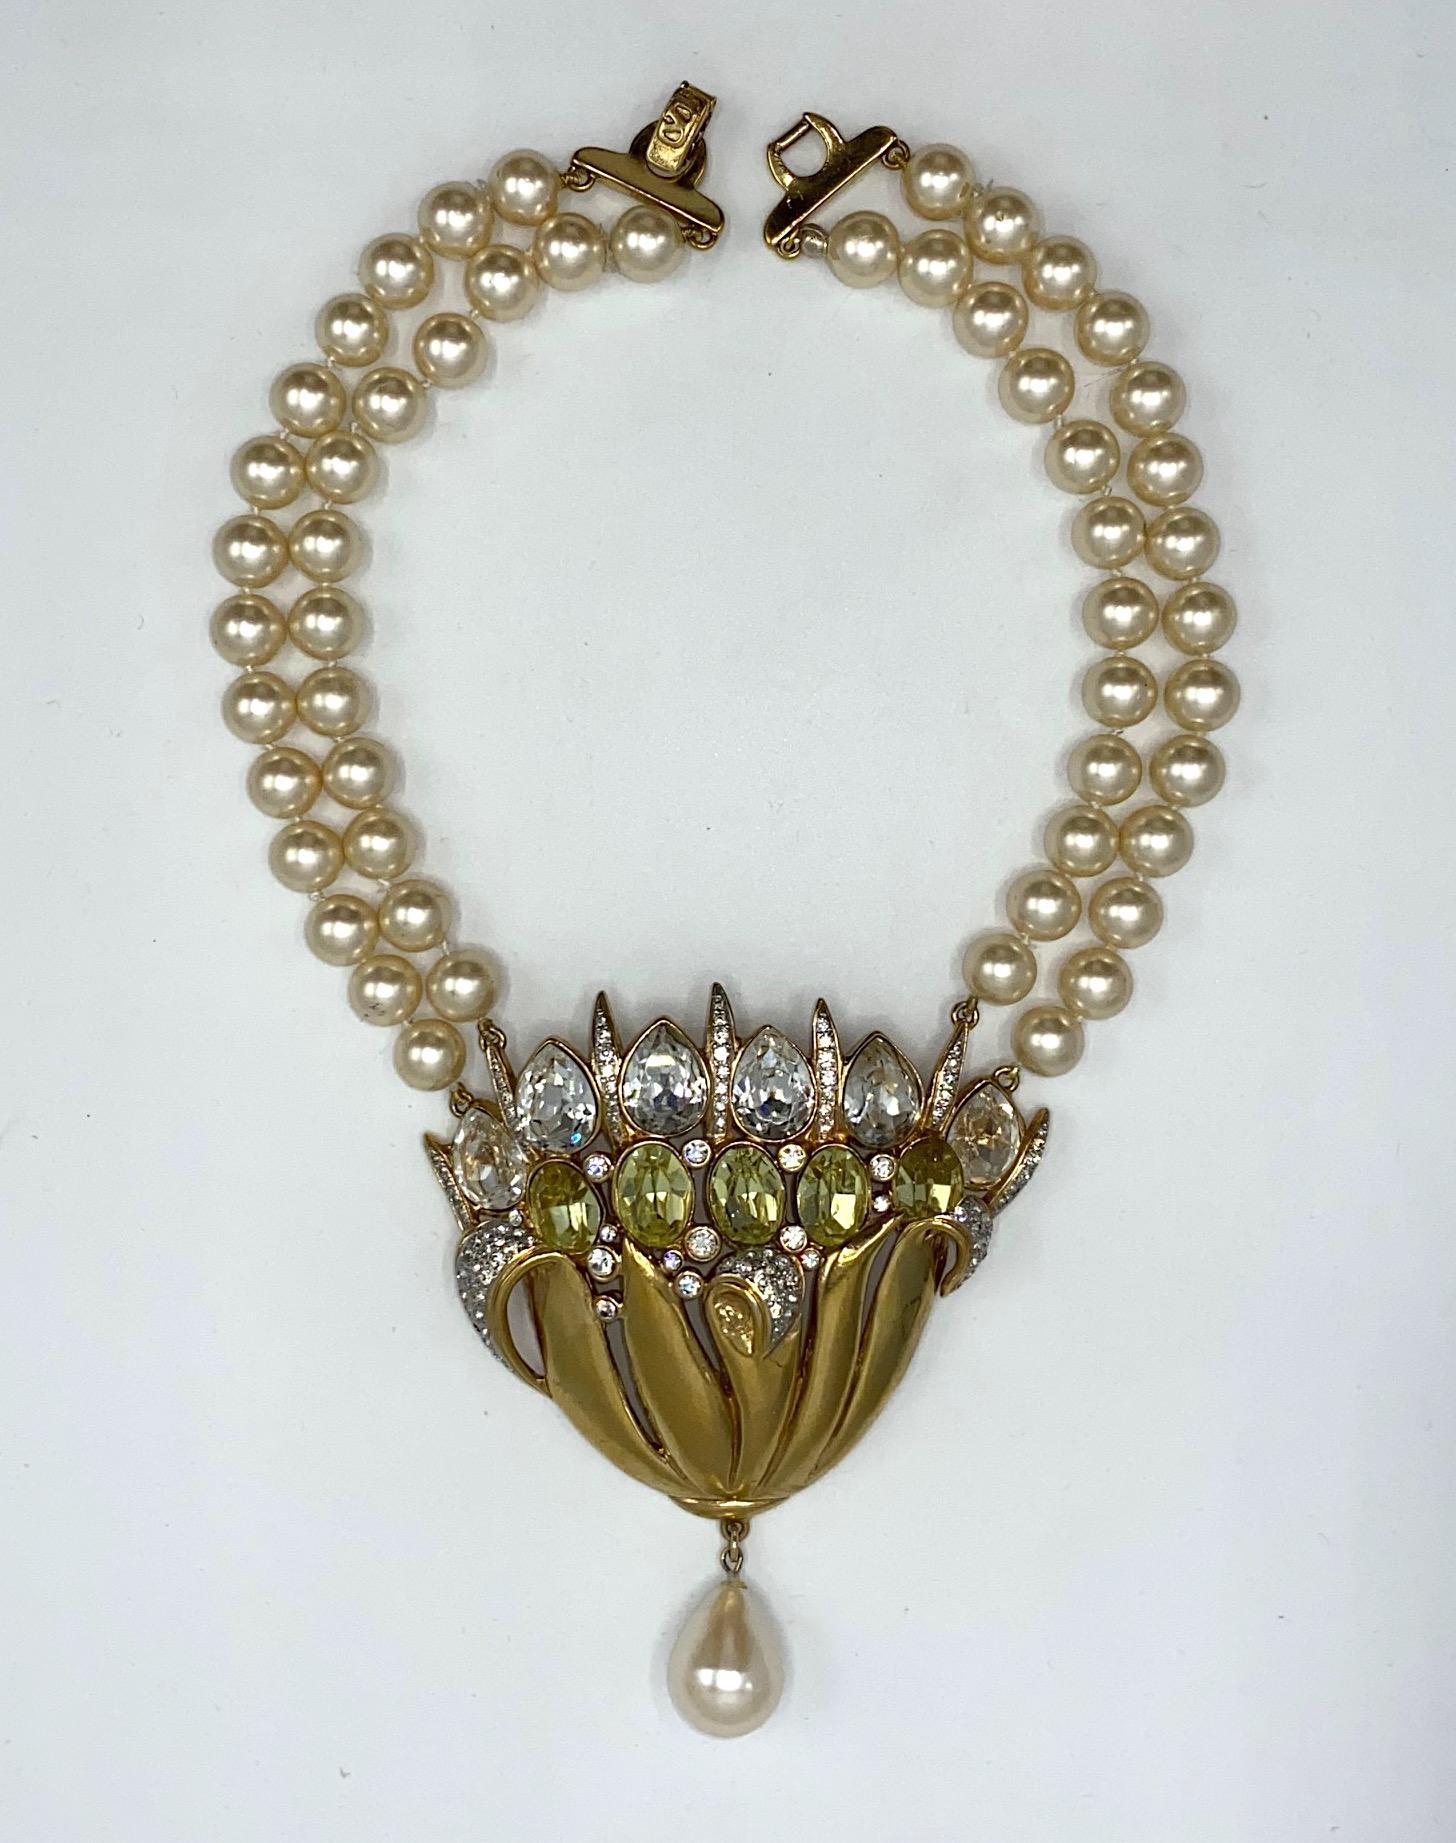 Valentino 1980s Pearl Necklace with Gold & Rhinestone Flower Center Piece 1